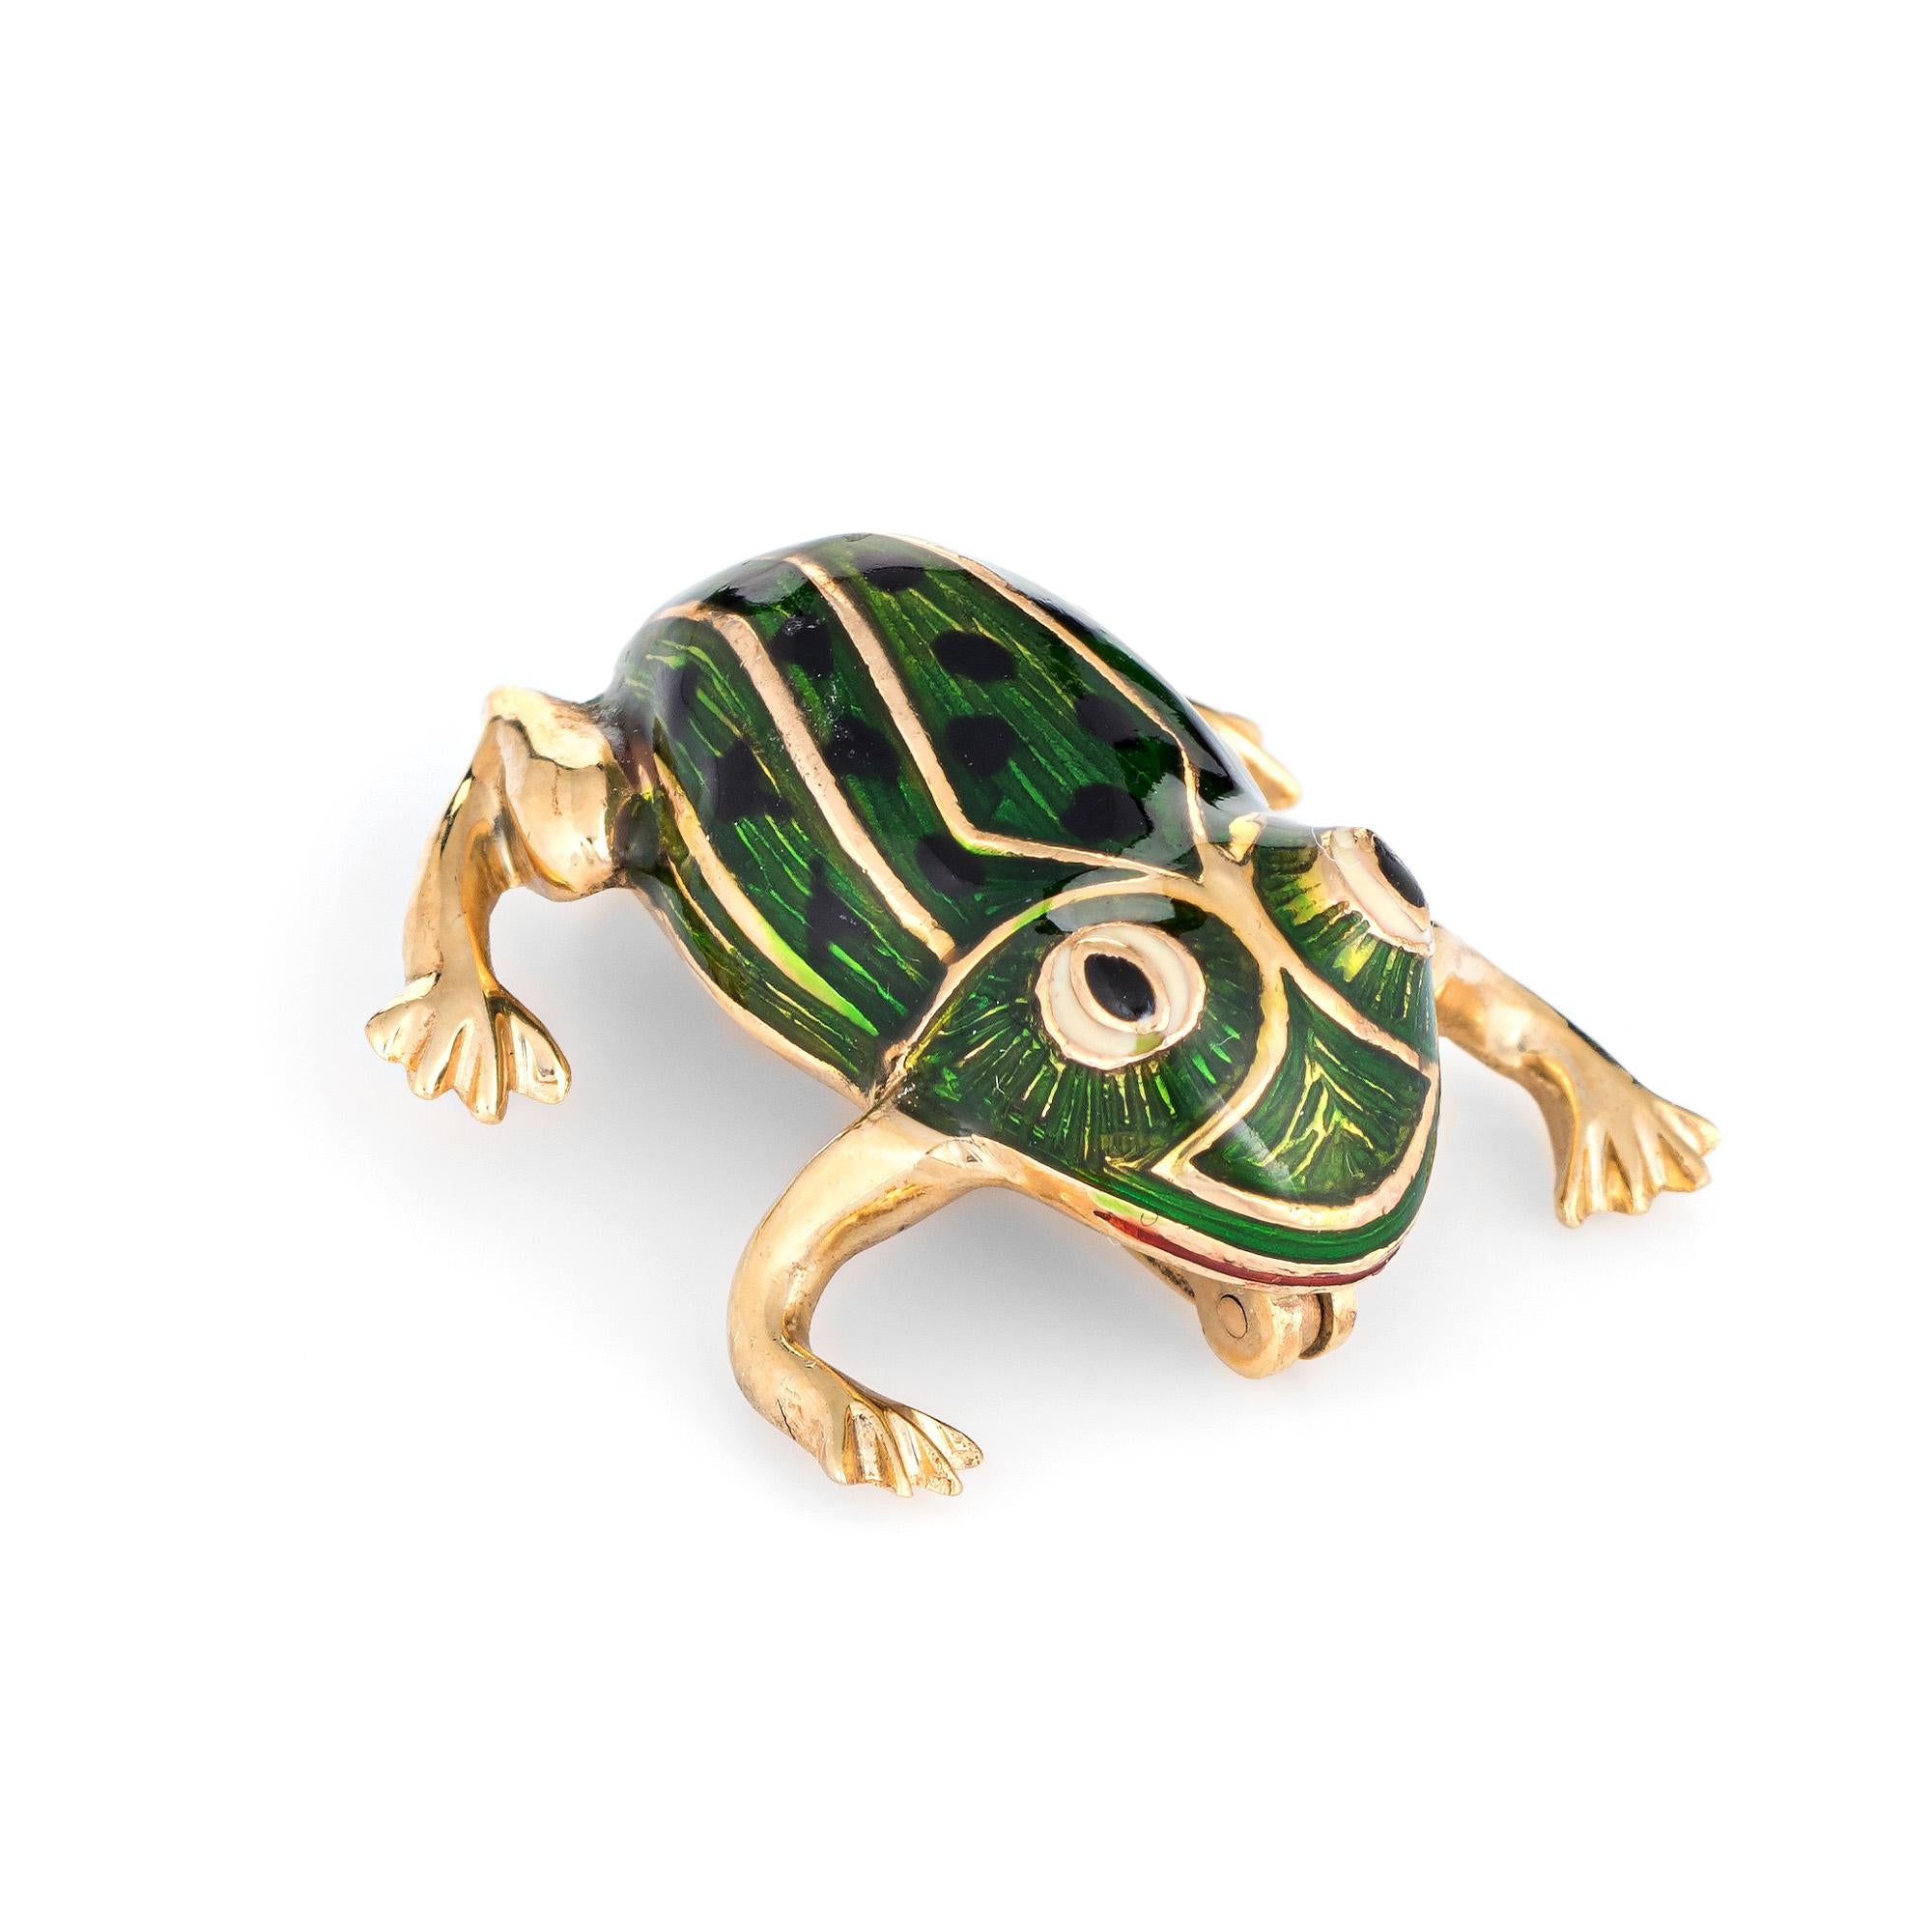 Finely detailed vintage frog brooch (circa 1960s to 1970s) crafted in 14 karat yellow gold. 

The happy frog features green enamel with black spots to the back. The frog is ideal worn on a lapel or sleeve cuff for a different look.

The brooch is in